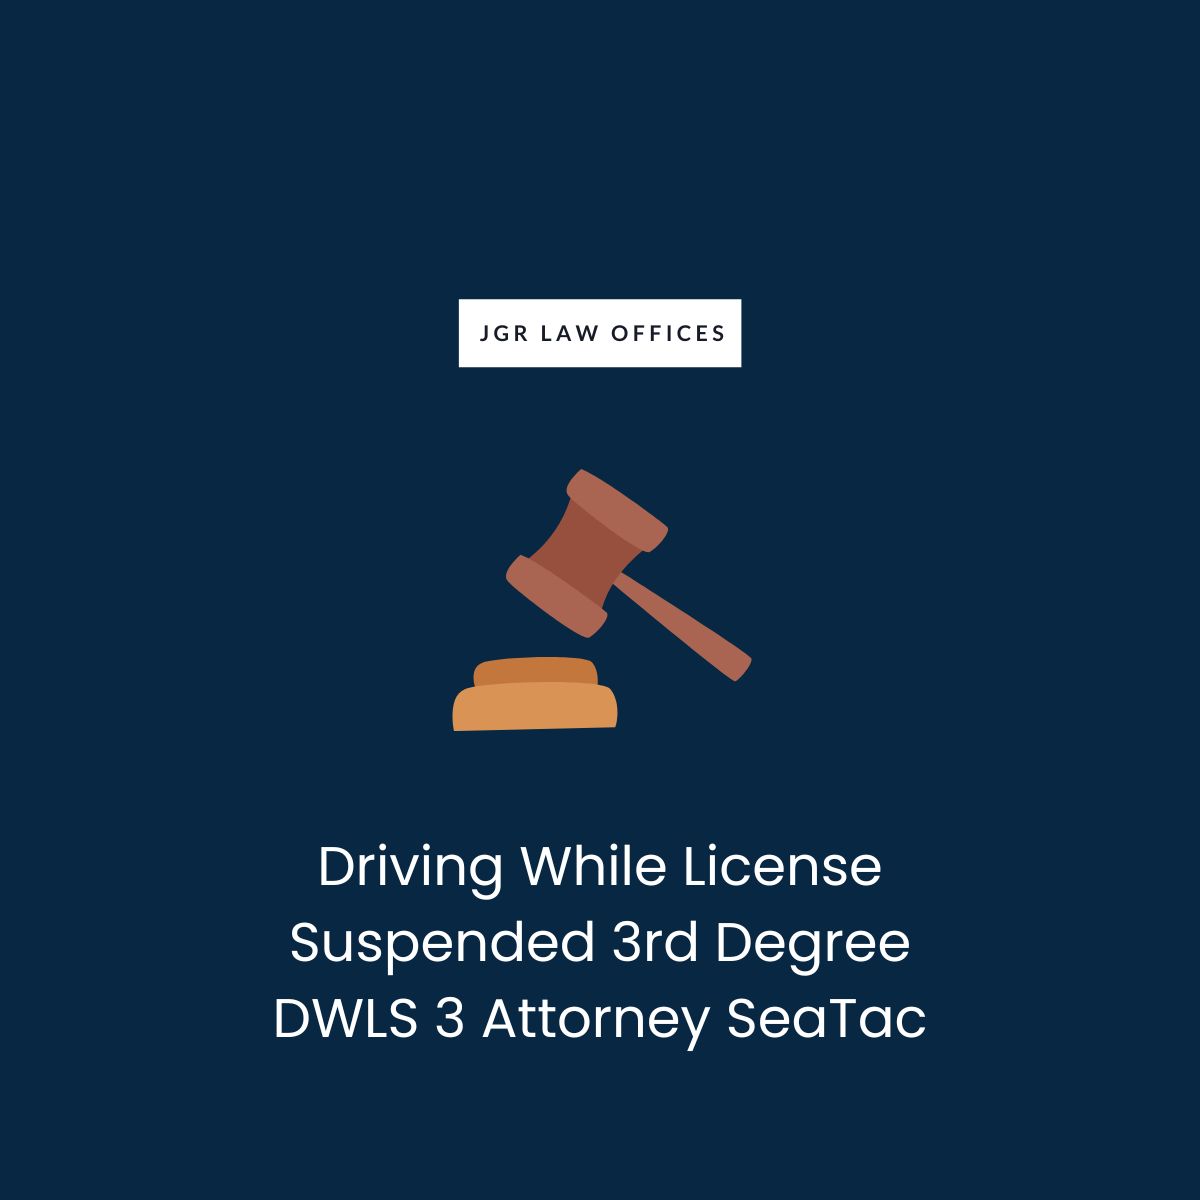 Driving While License Suspended 3rd Degree DWLS 3 Lawyer SeaTac Driving While License Suspended 3rd Degree DWLS 3 Driving While License Suspended 3rd Degree DWLS 3